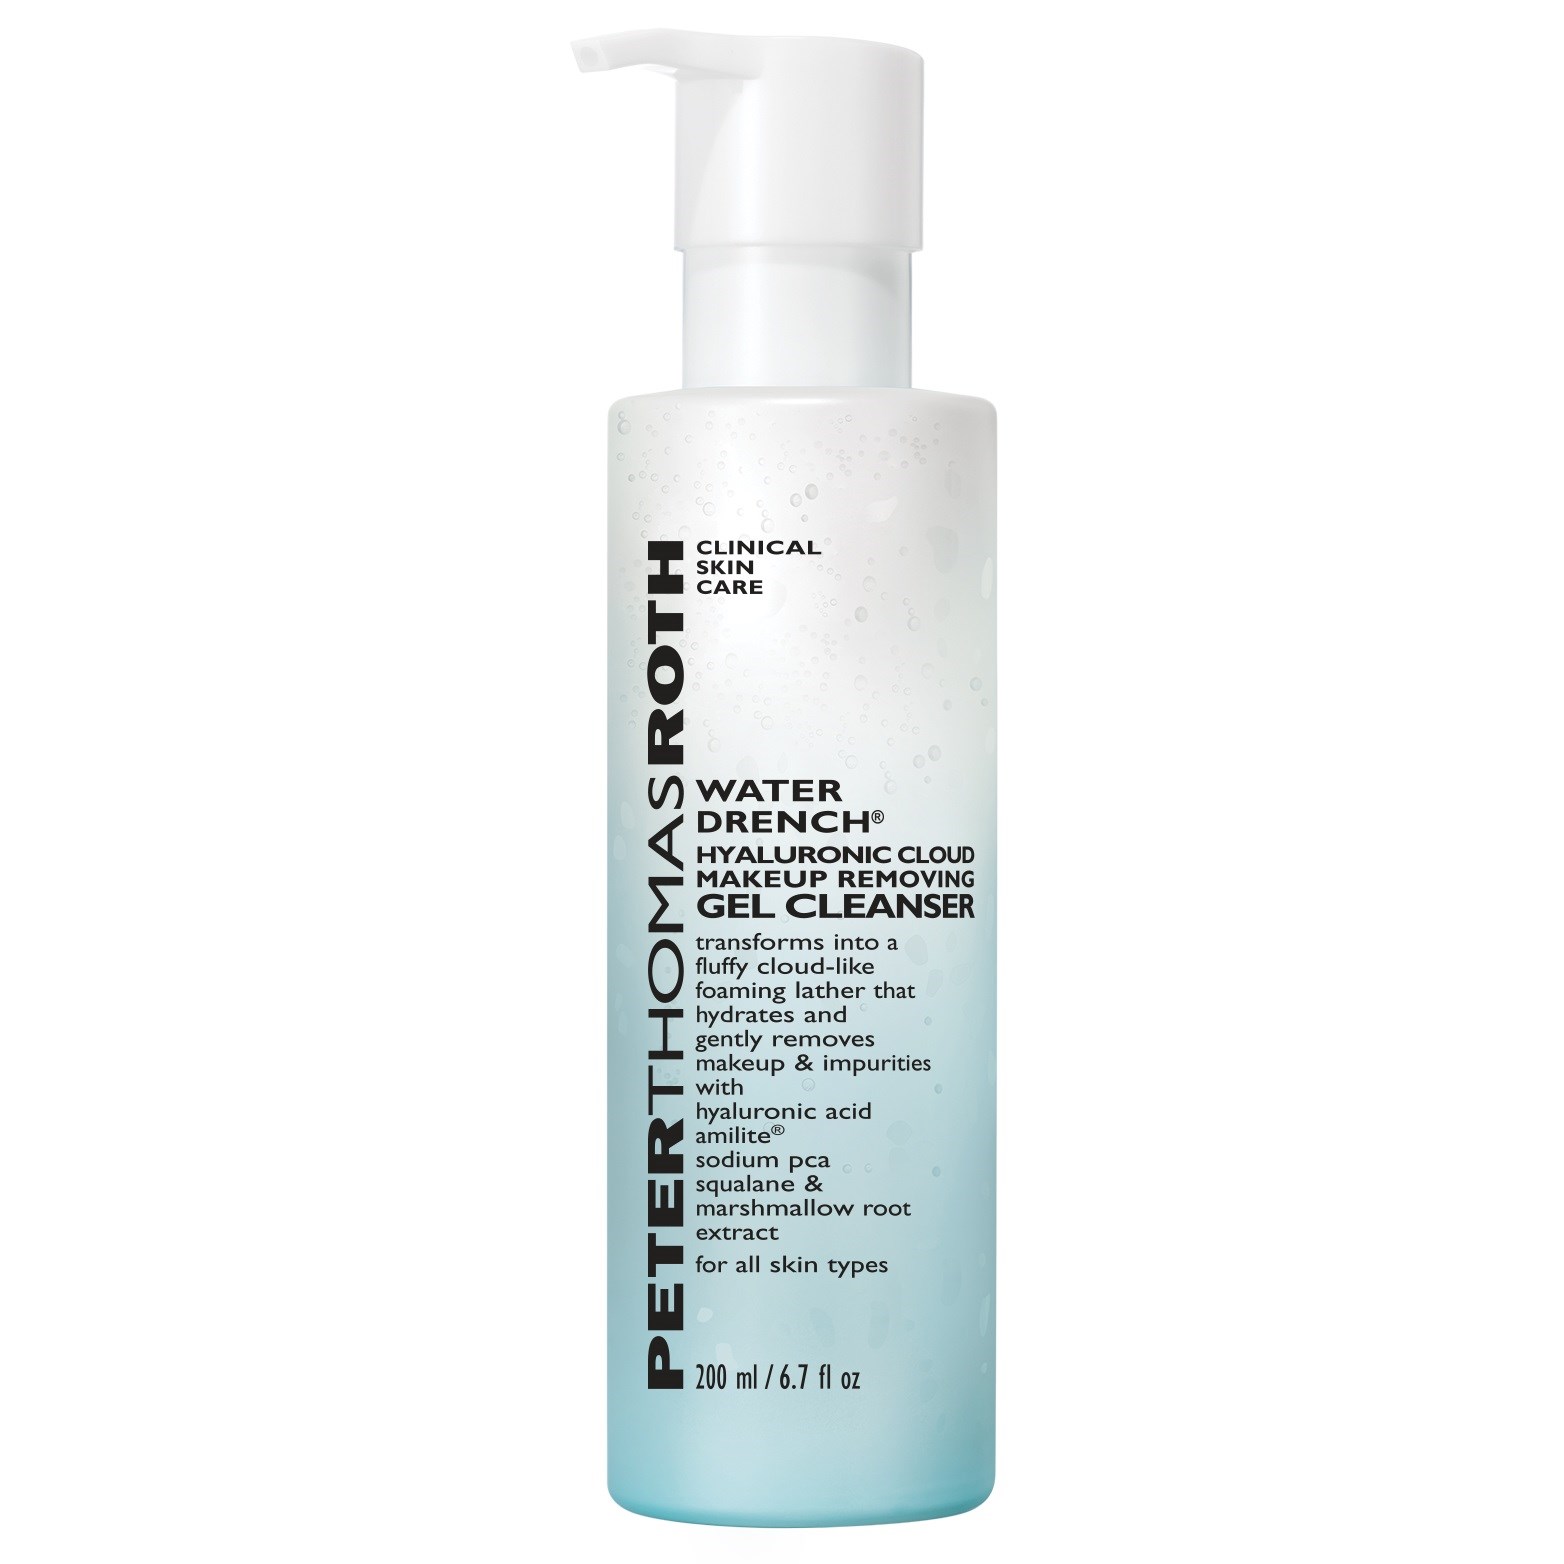 Peter Thomas Roth Water Drench Hyaluronic Cloud Makeup Removing Gel Cl